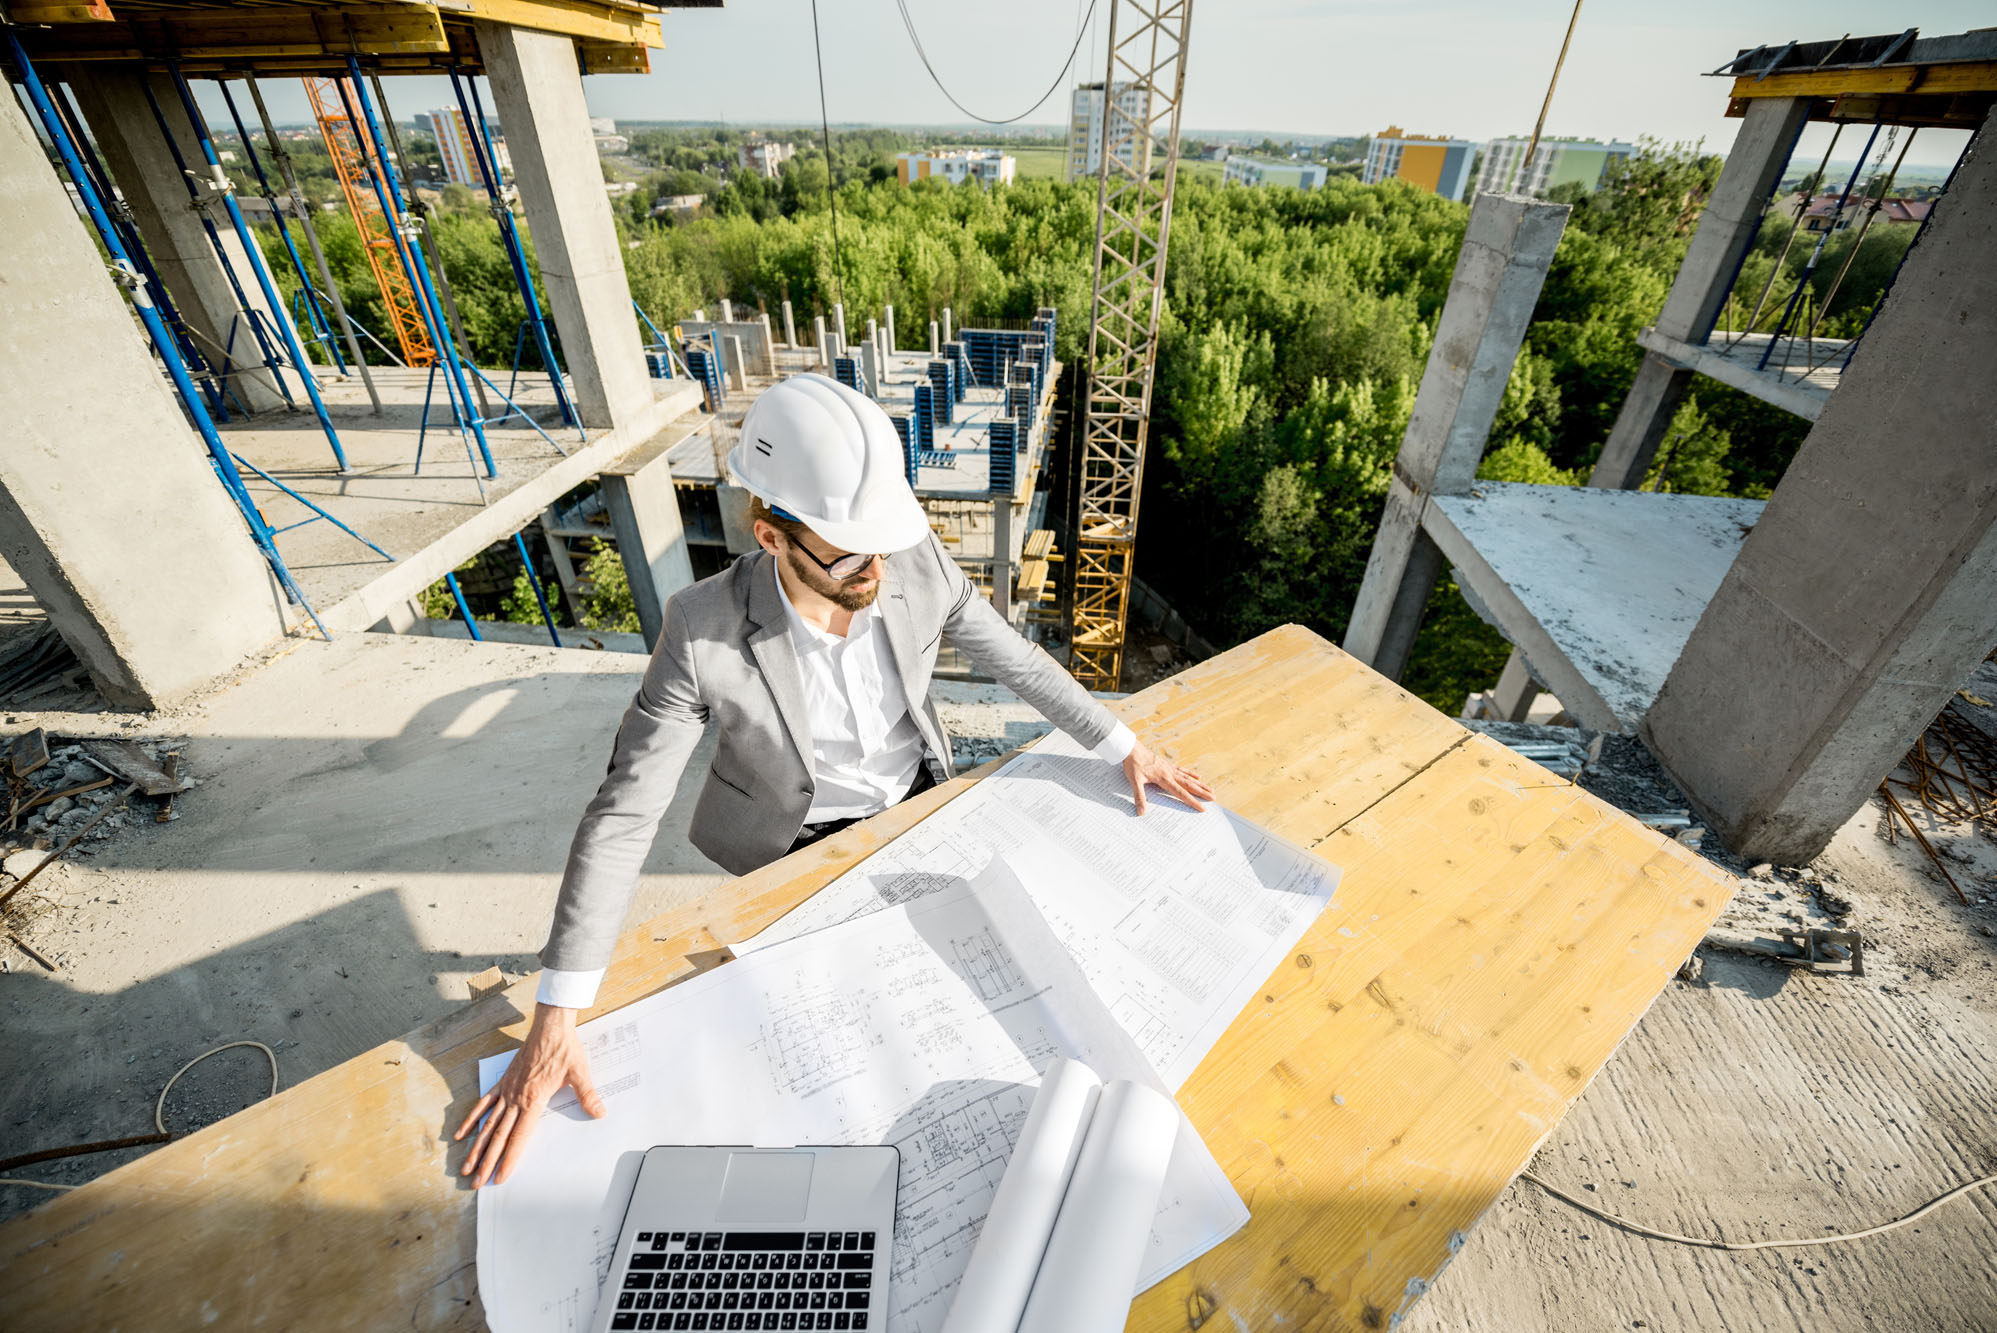 Engineer with drawings on the structure